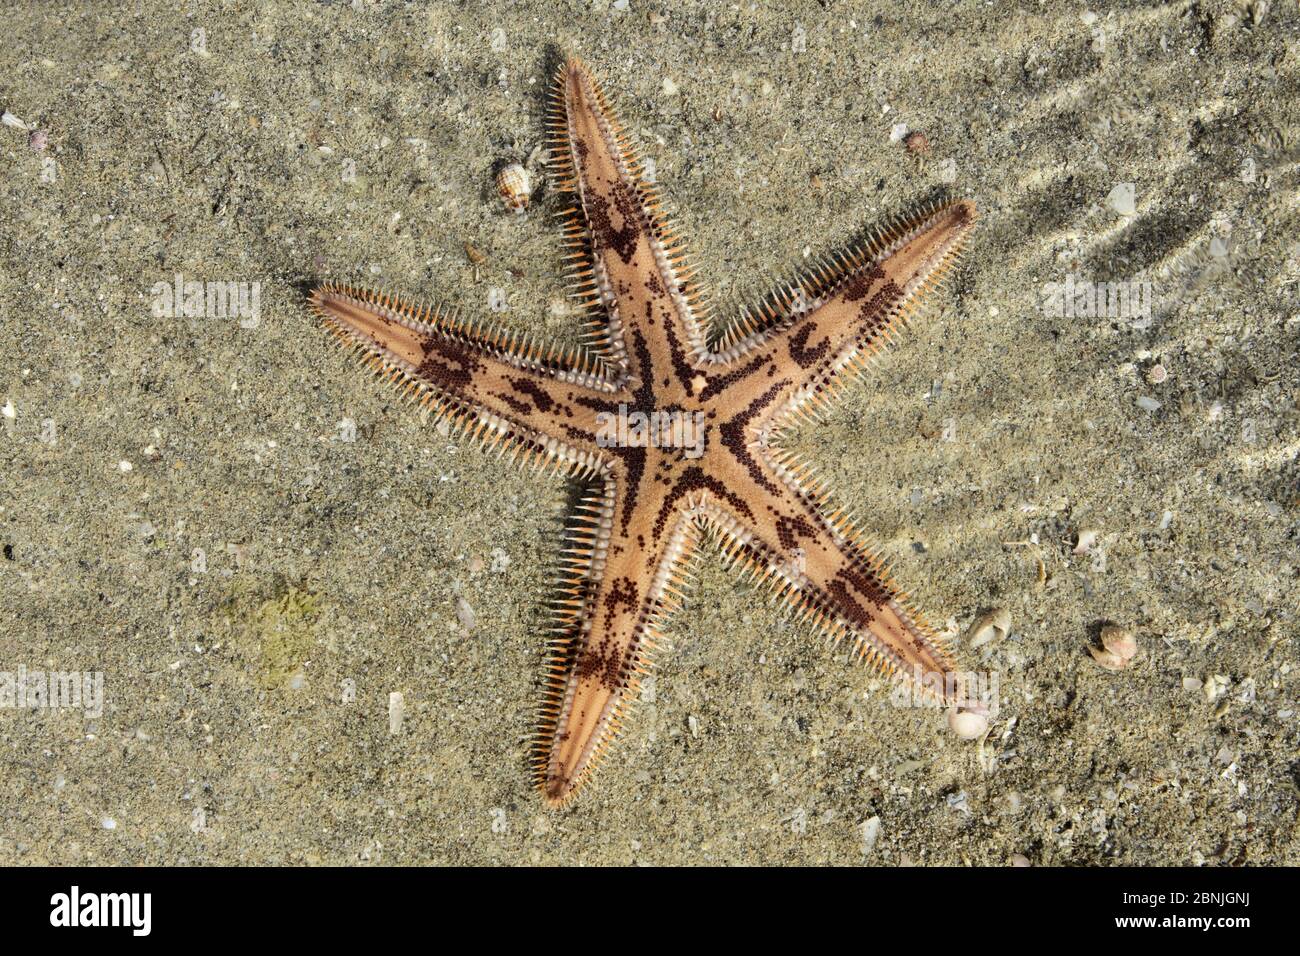 Comb sea star (Astropecten polyacanthus) in shallow water, Oman, August Stock Photo